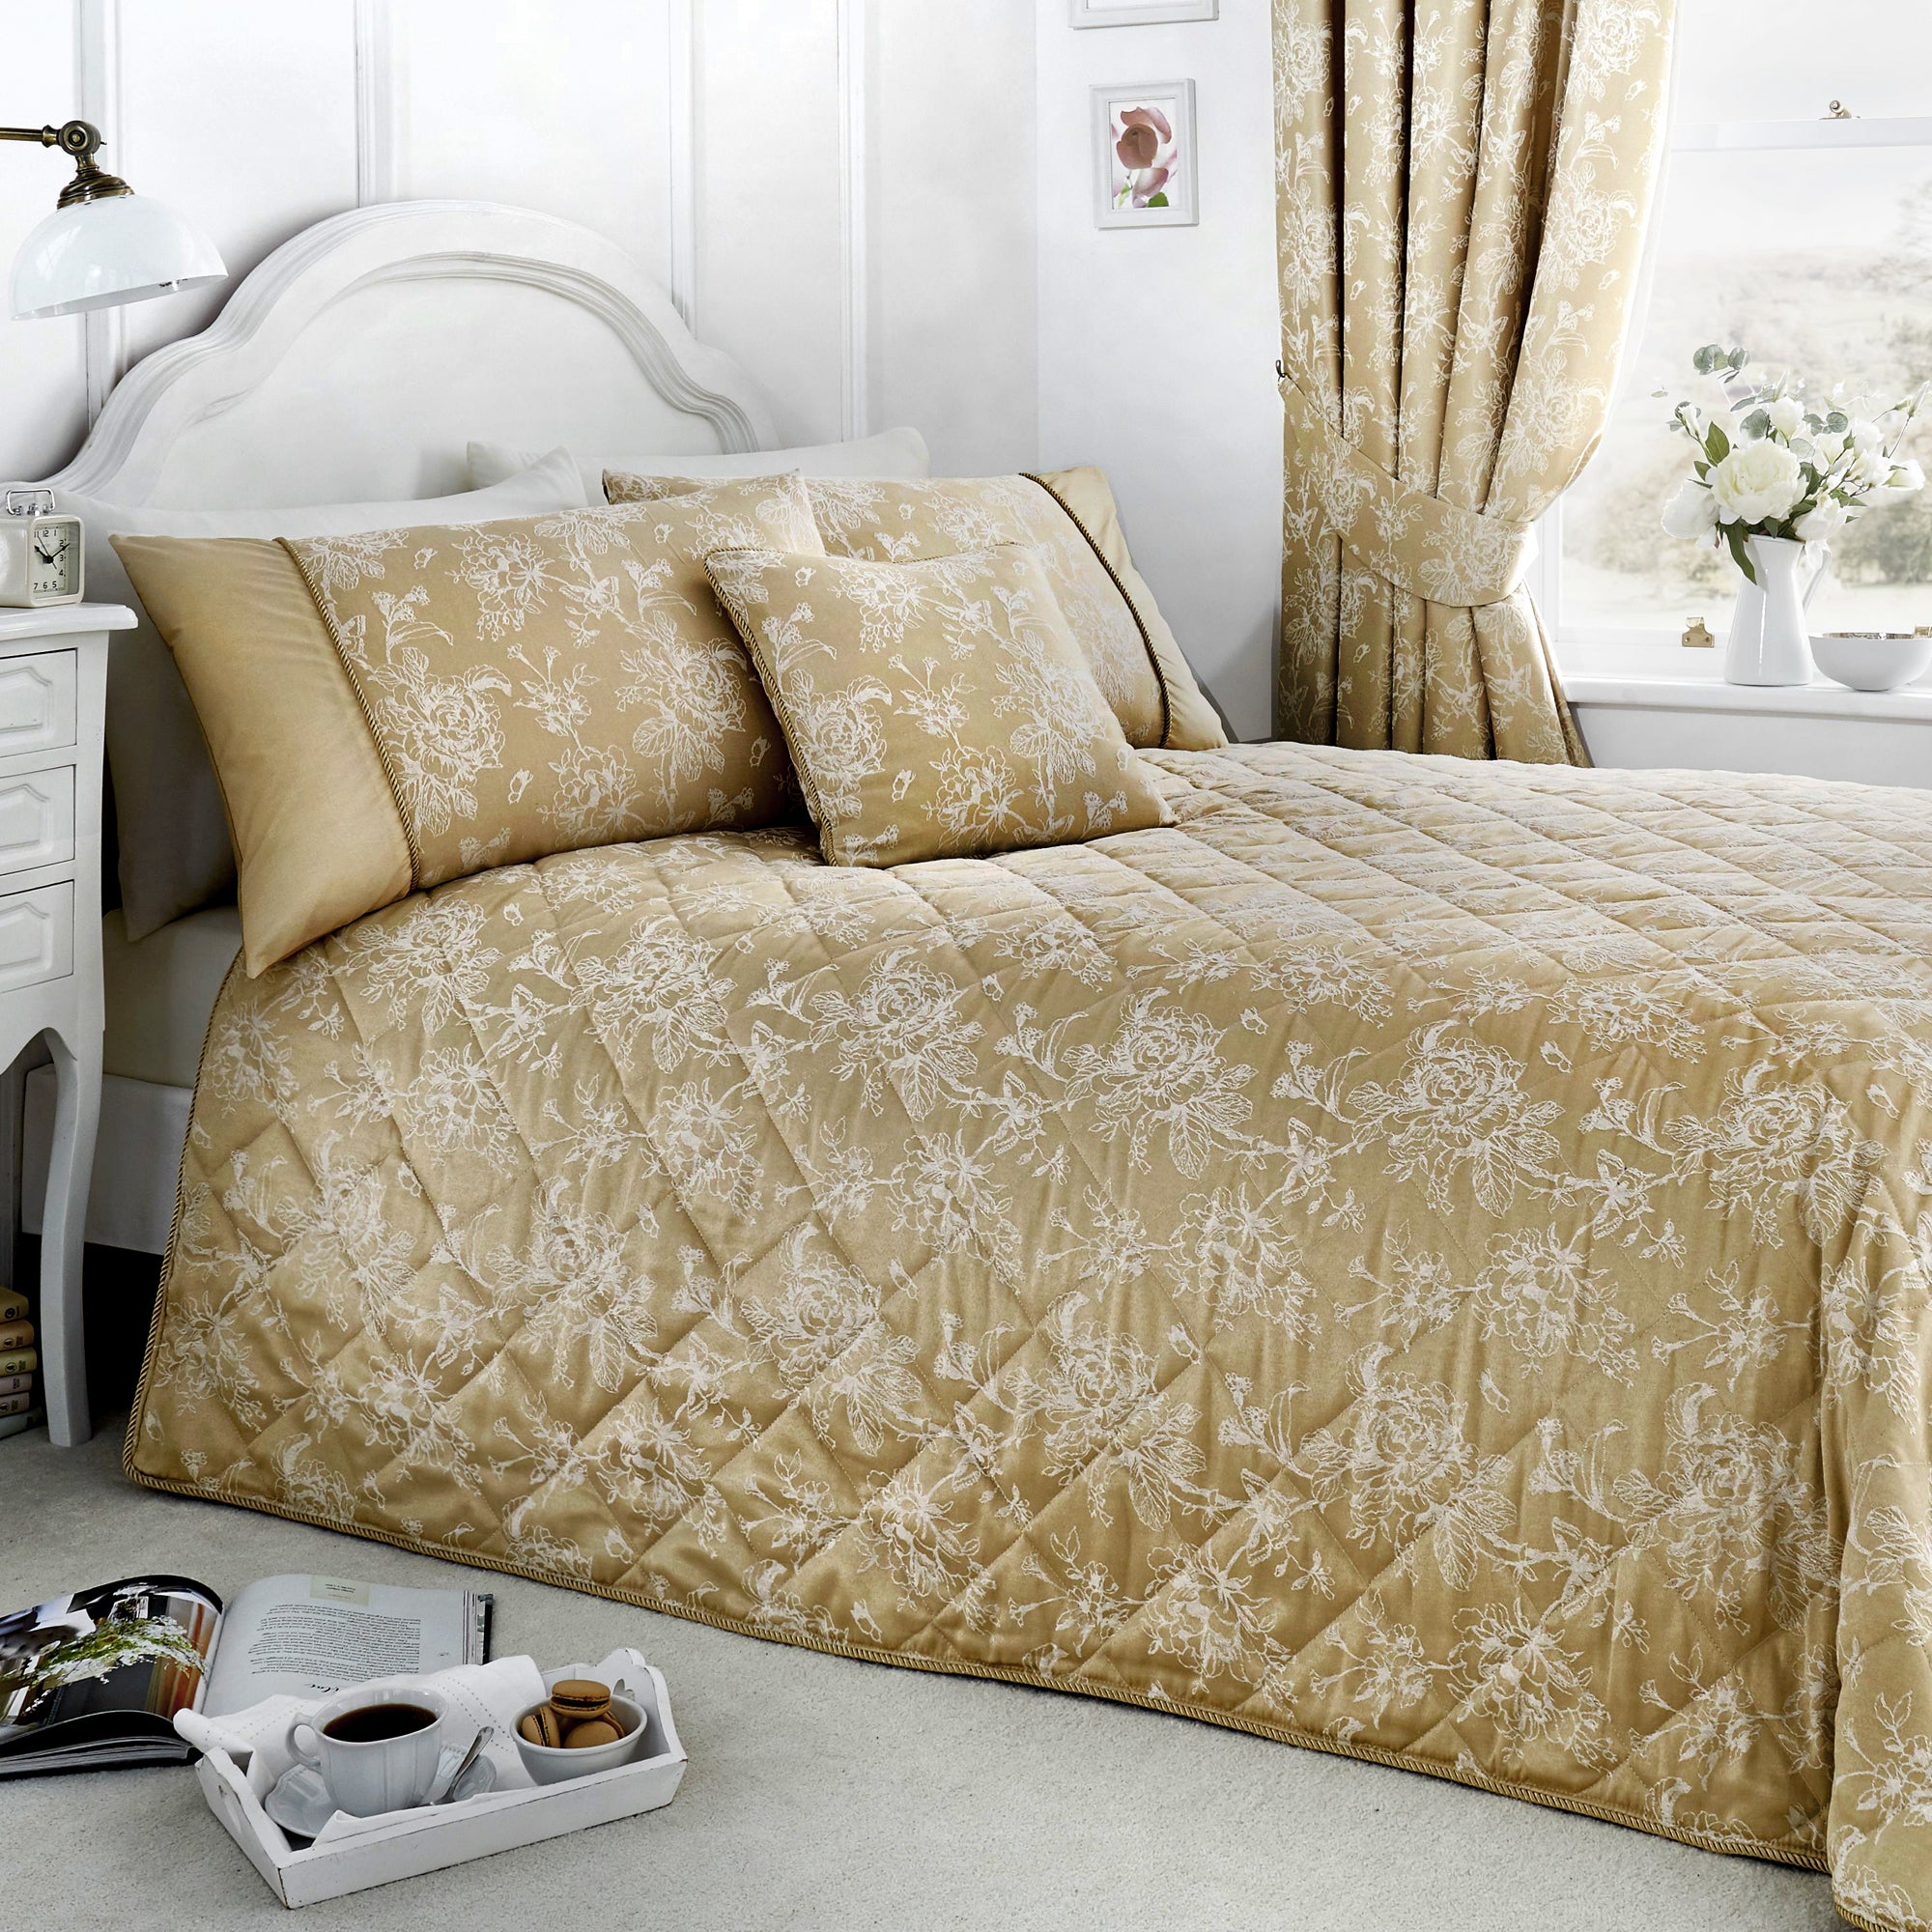 Jasmine - Damask Easy Care Bedding Set, Curtains & Cushions in Champagne - by D&D Woven